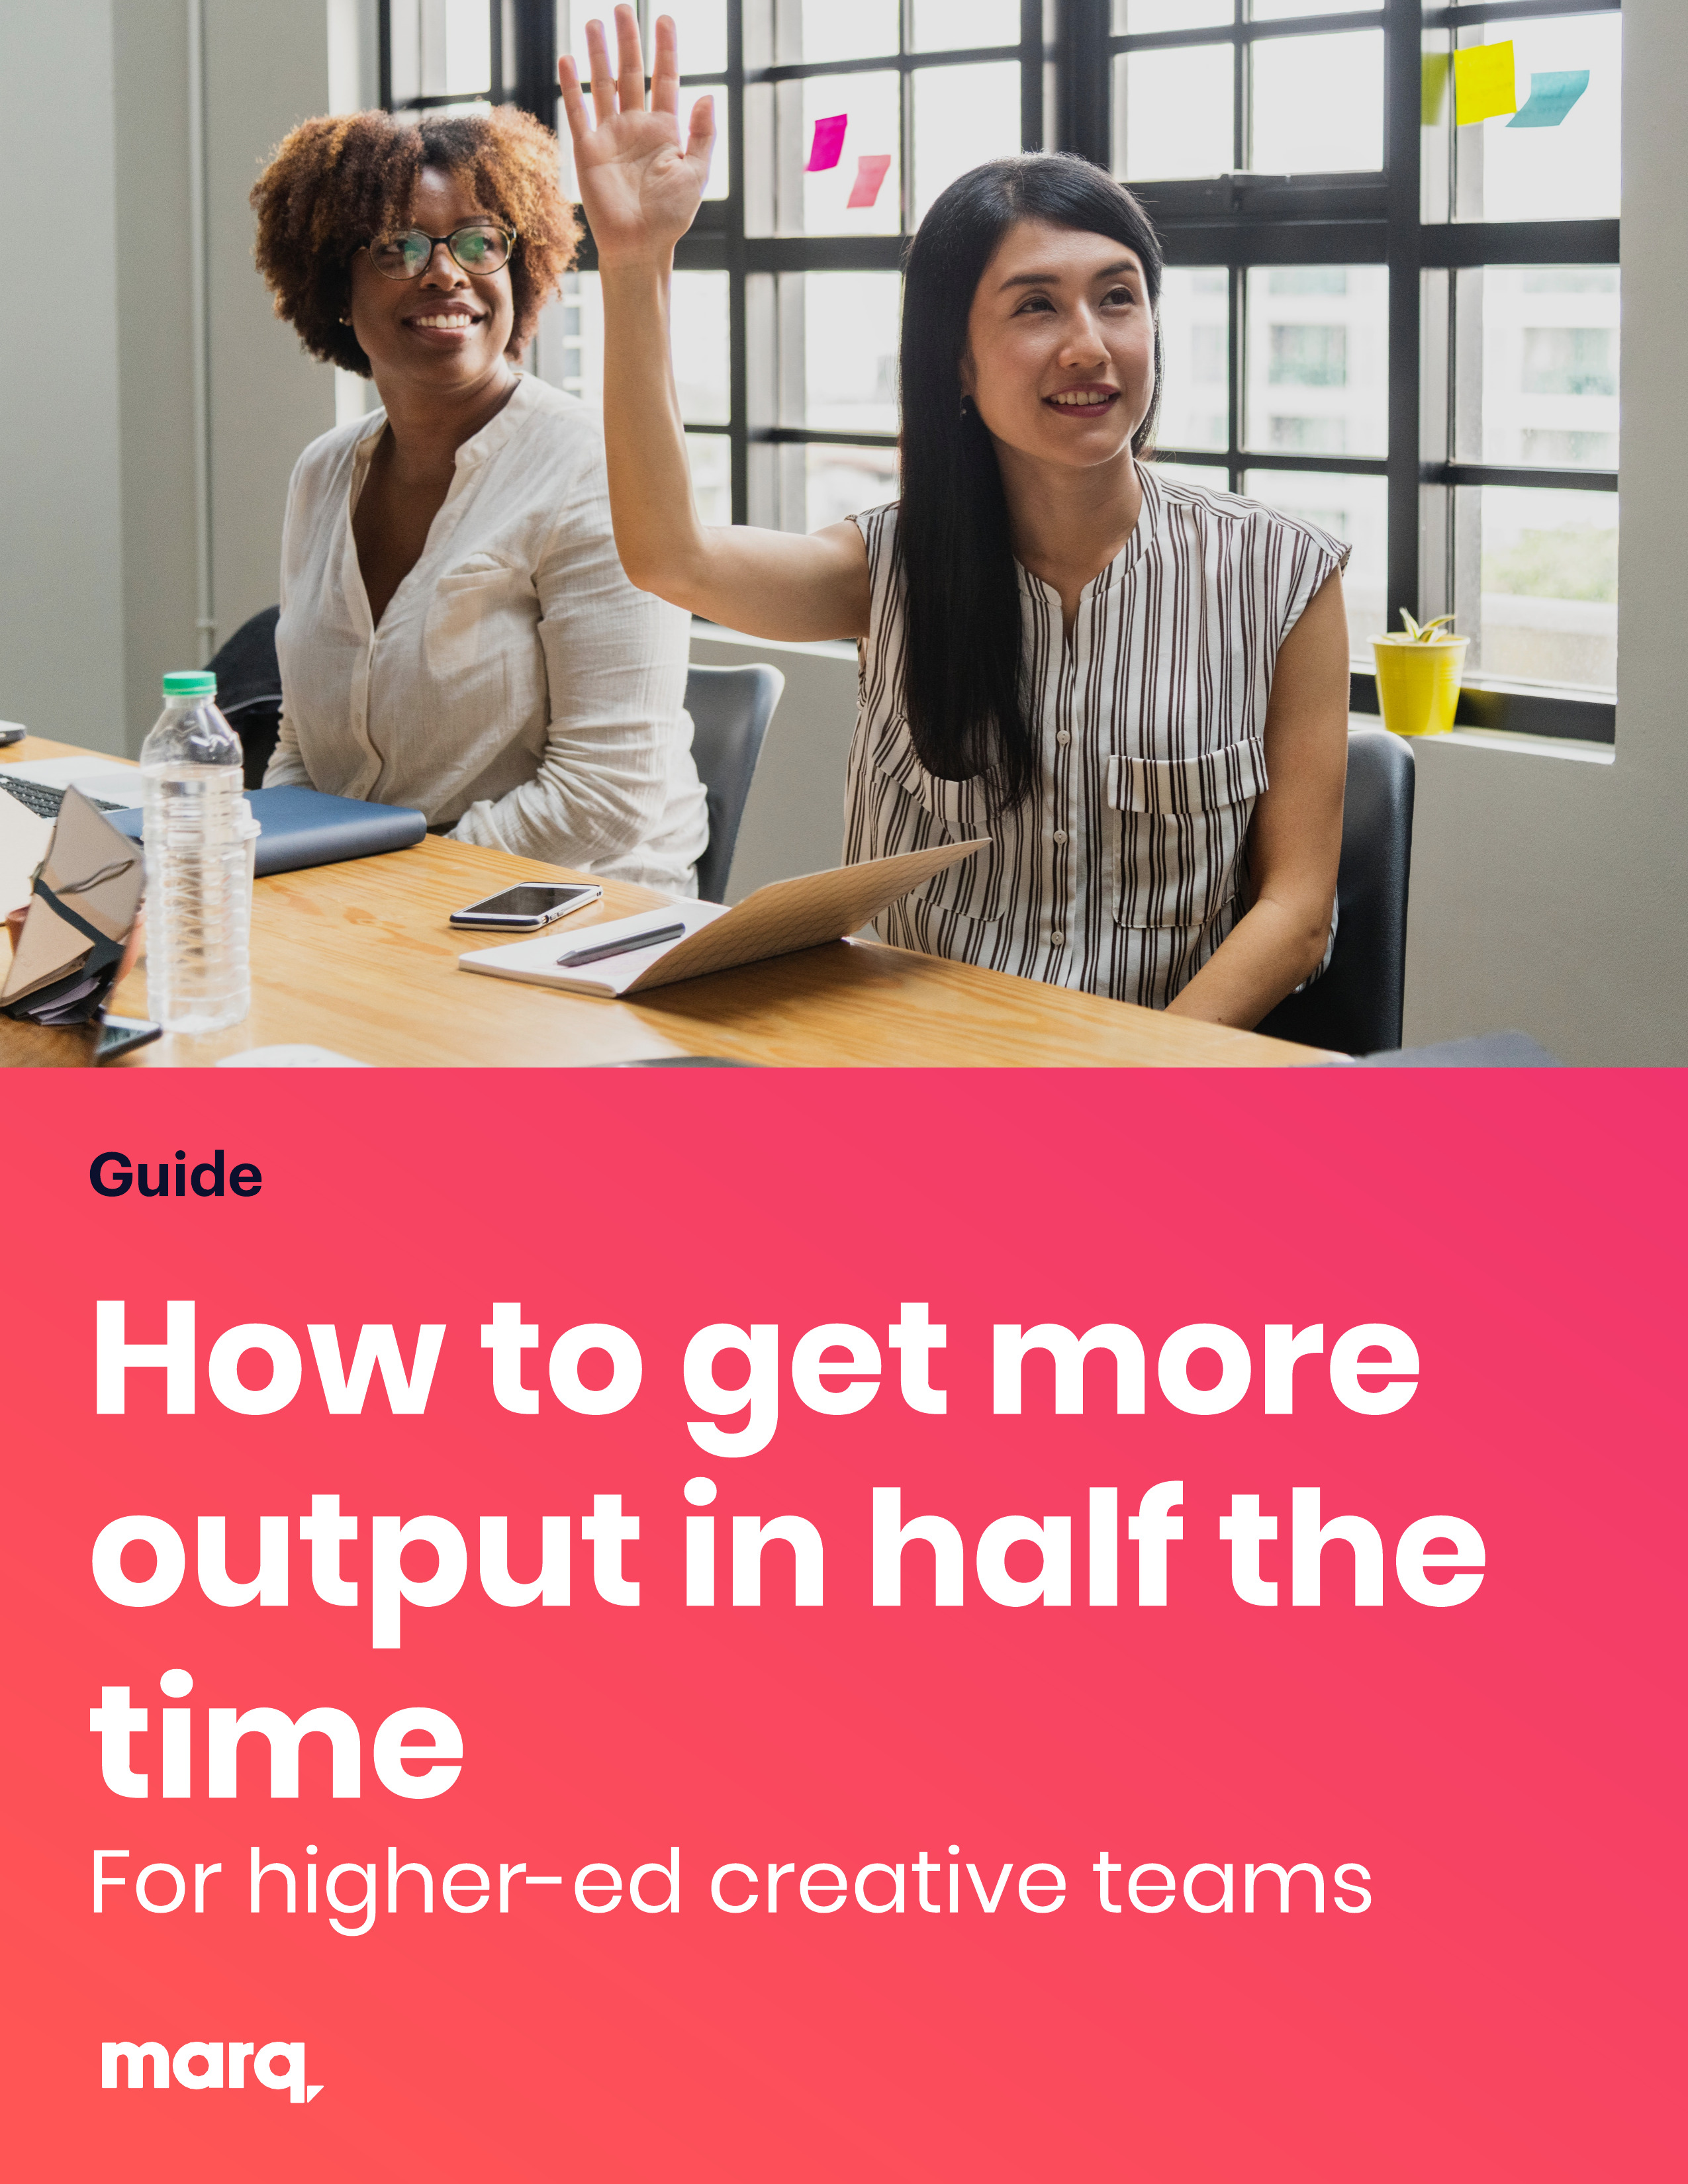 ebook-how-to-get-more-output-in-half-the-time-higher-ed